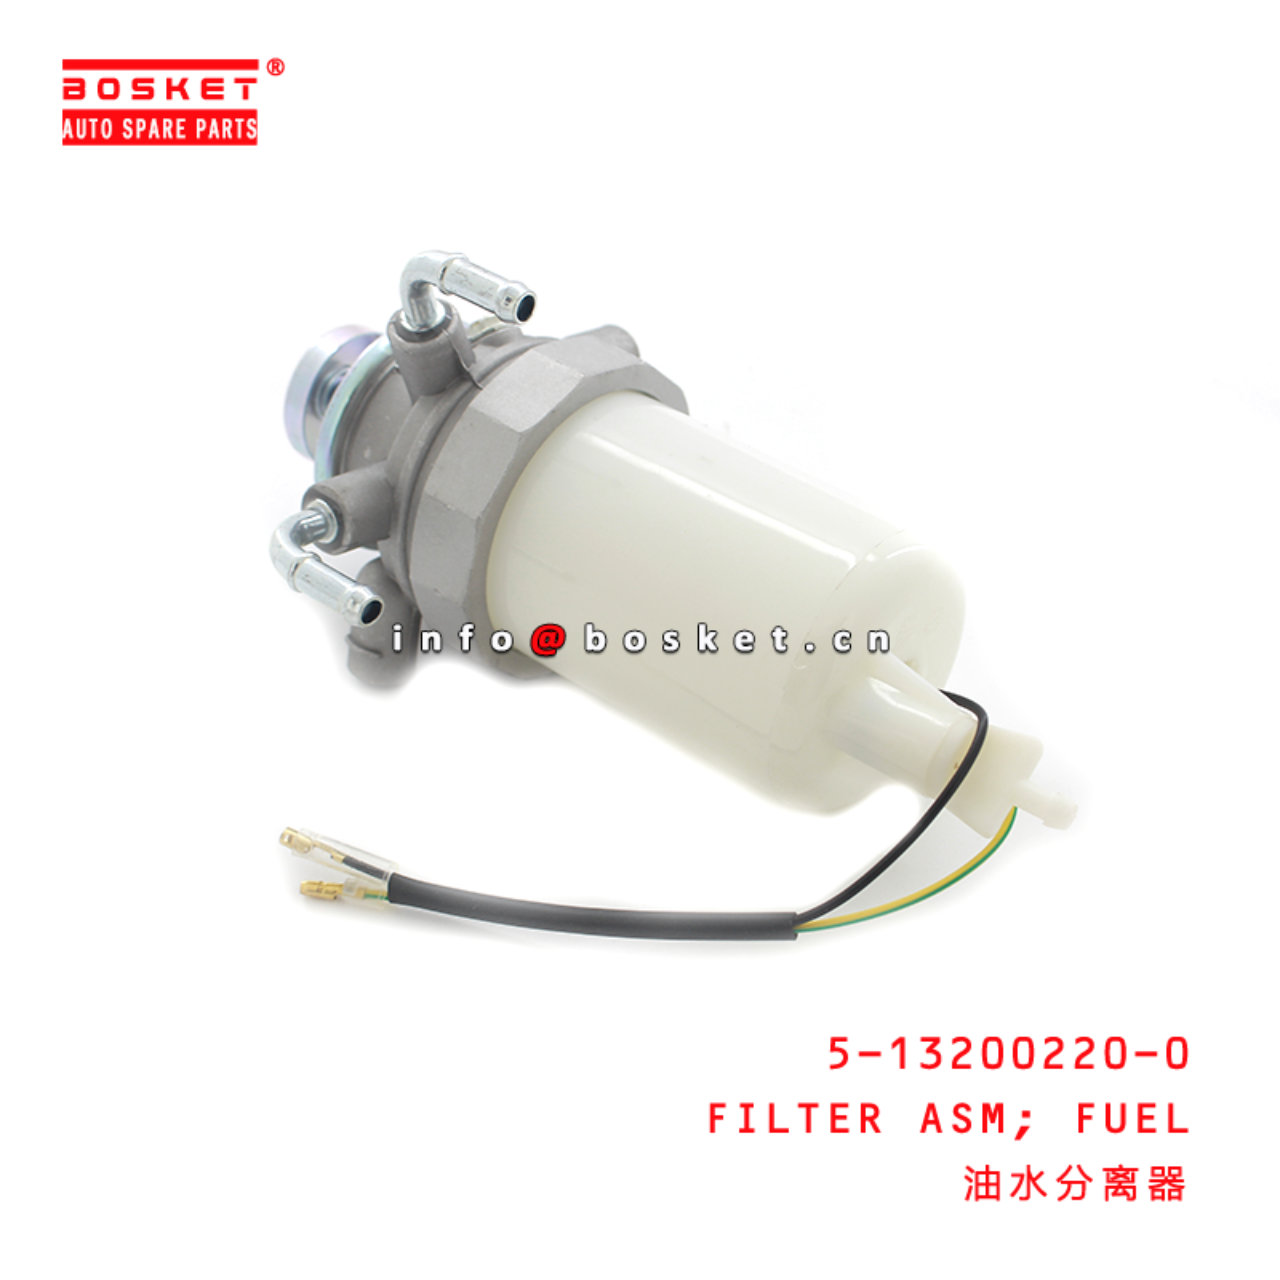 5-13200220-0 Fuel Filter Assembly Suitable for ISU...